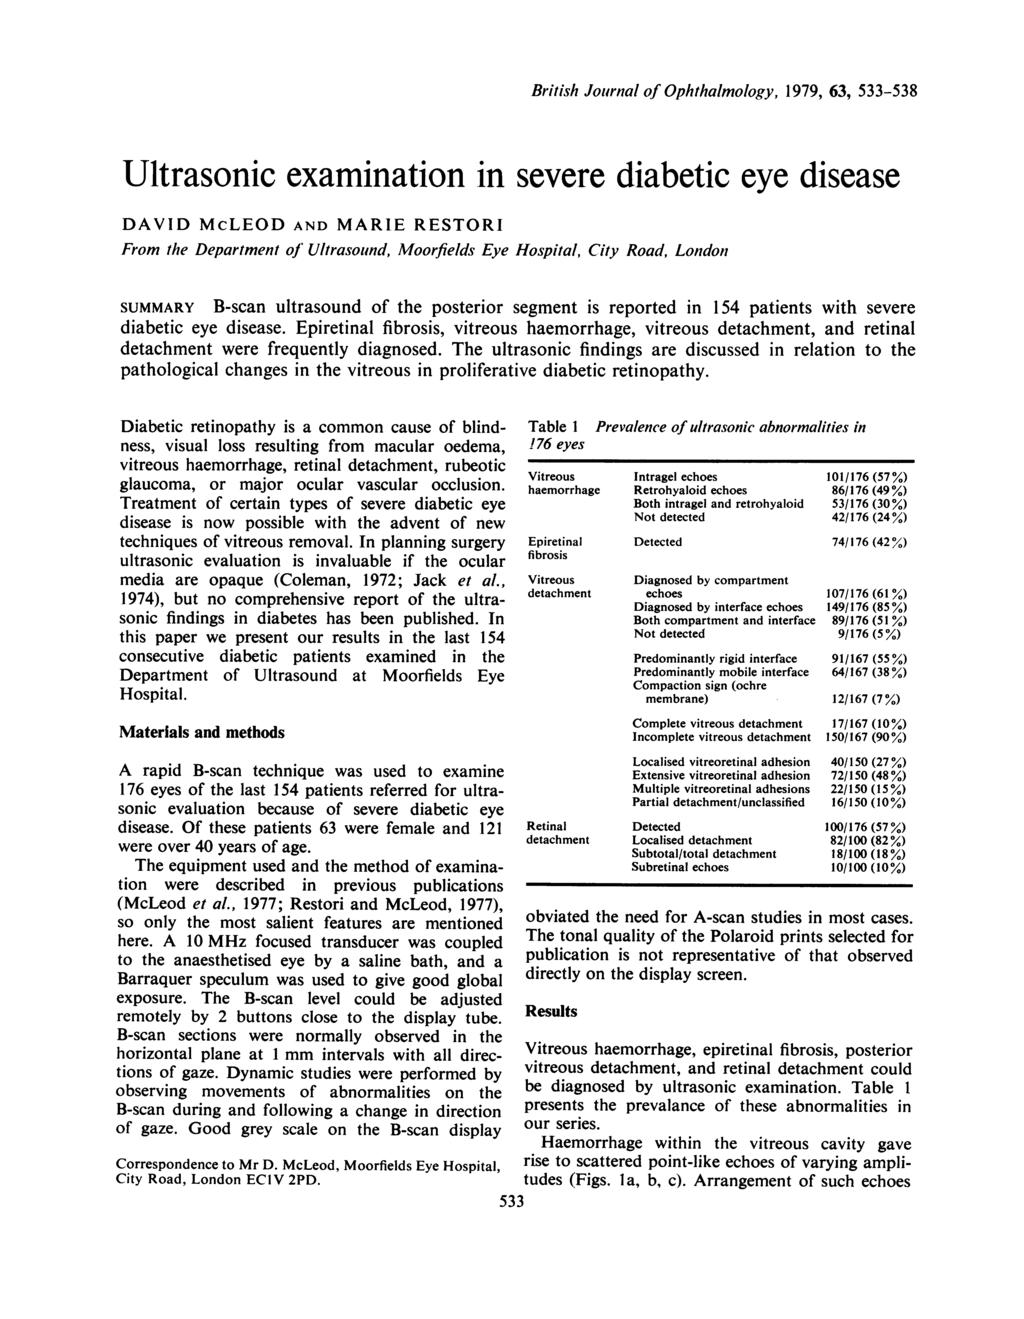 British Journal of Ophthalmology, 1979, 63, 533-538 Ultrasonic examination in severe diabetic eye disease DAVID McLEOD AND MARIE RESTORI From the Department of Ultrasound, Moorfields Eye Hospital,